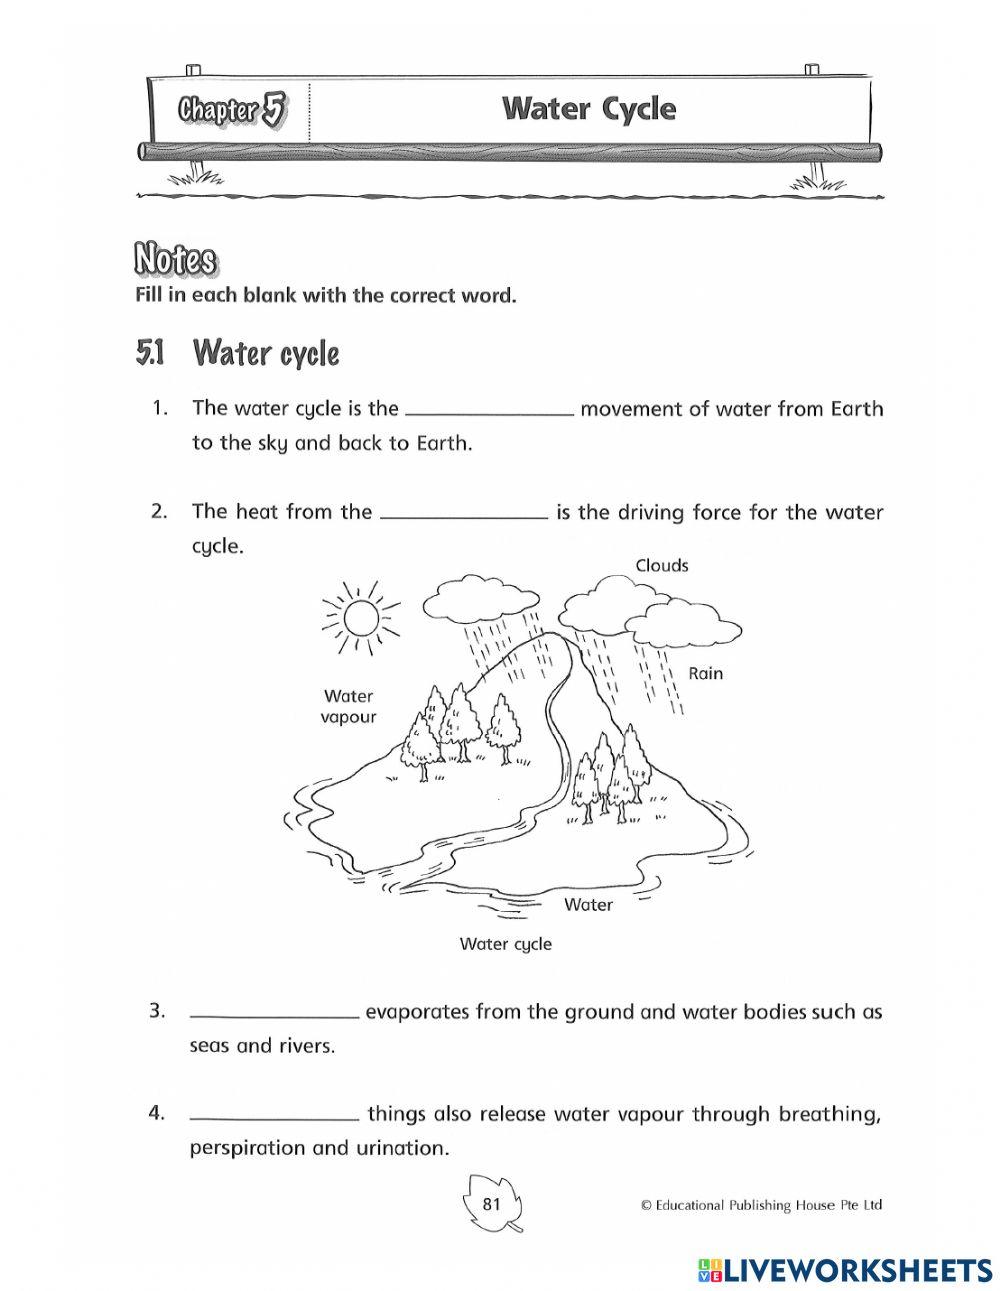 5E1 Water cycle